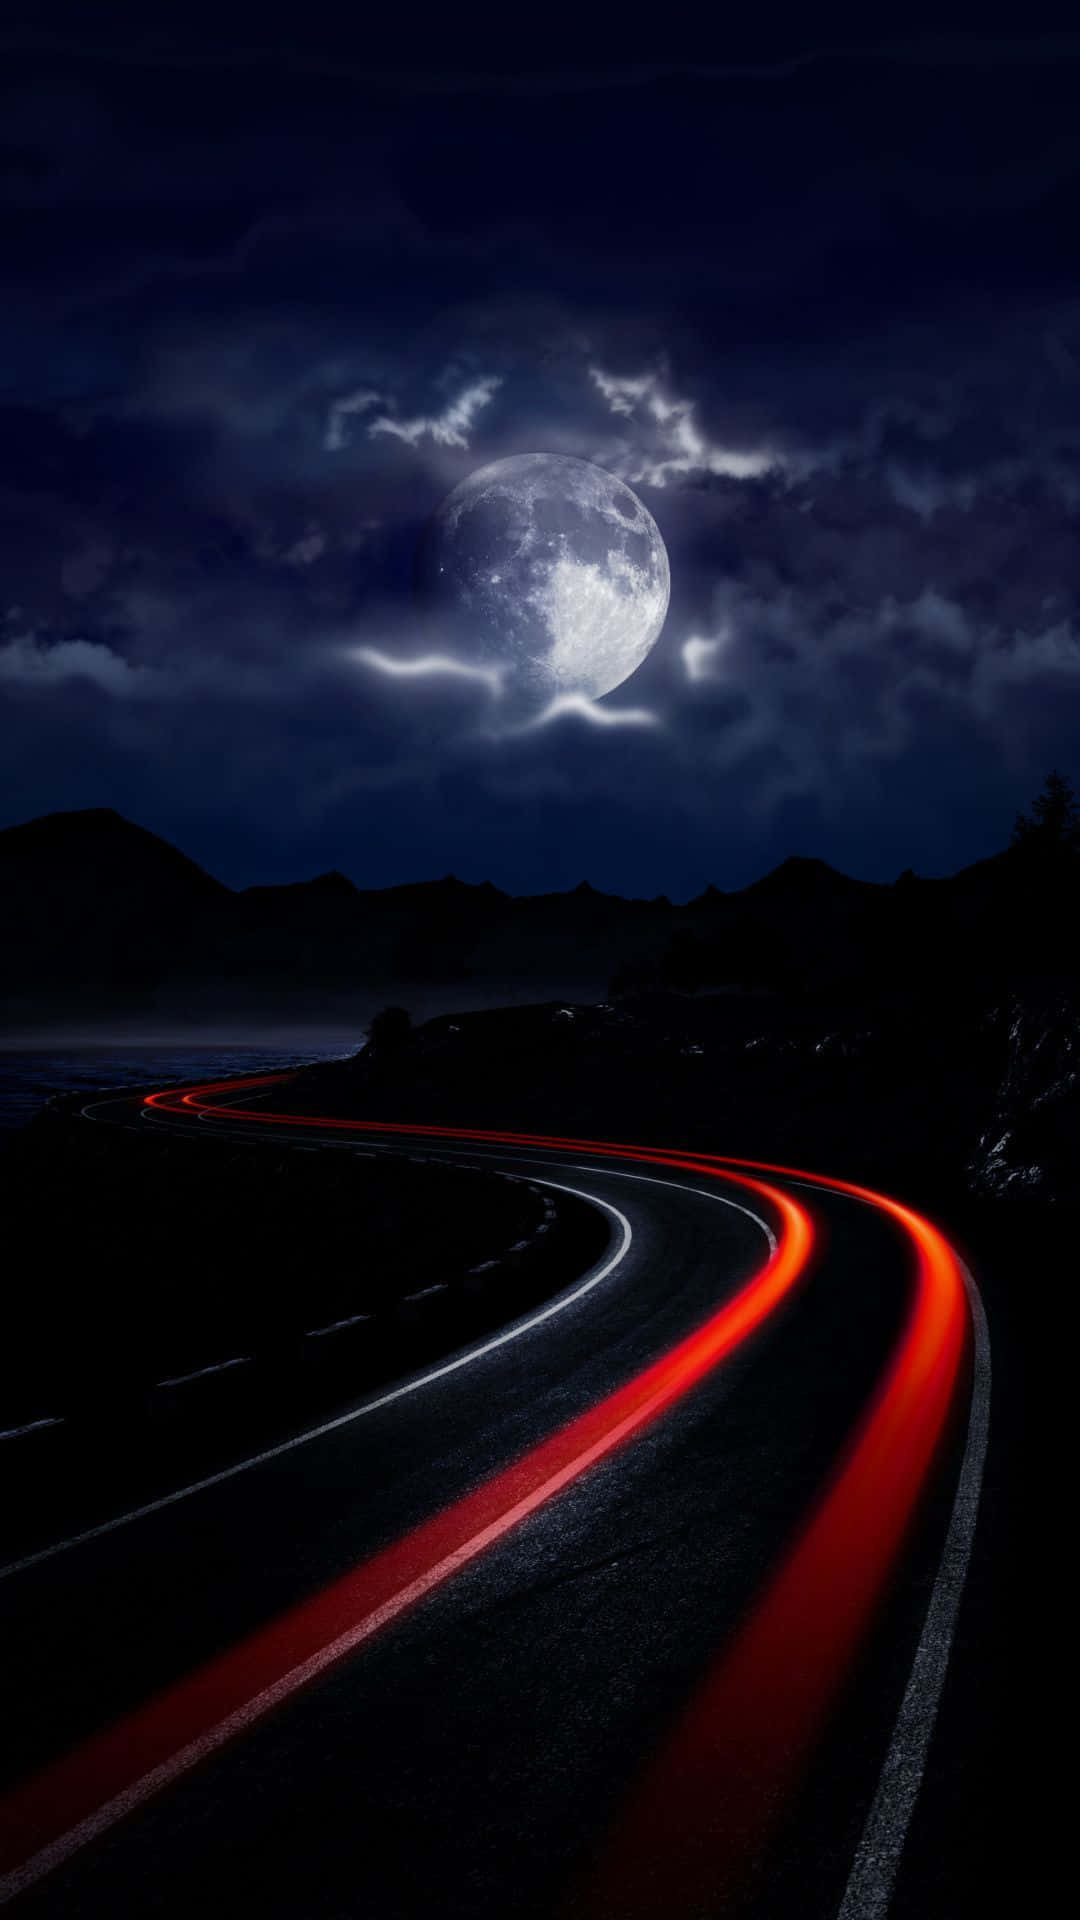 A Road With Red Lights And A Full Moon